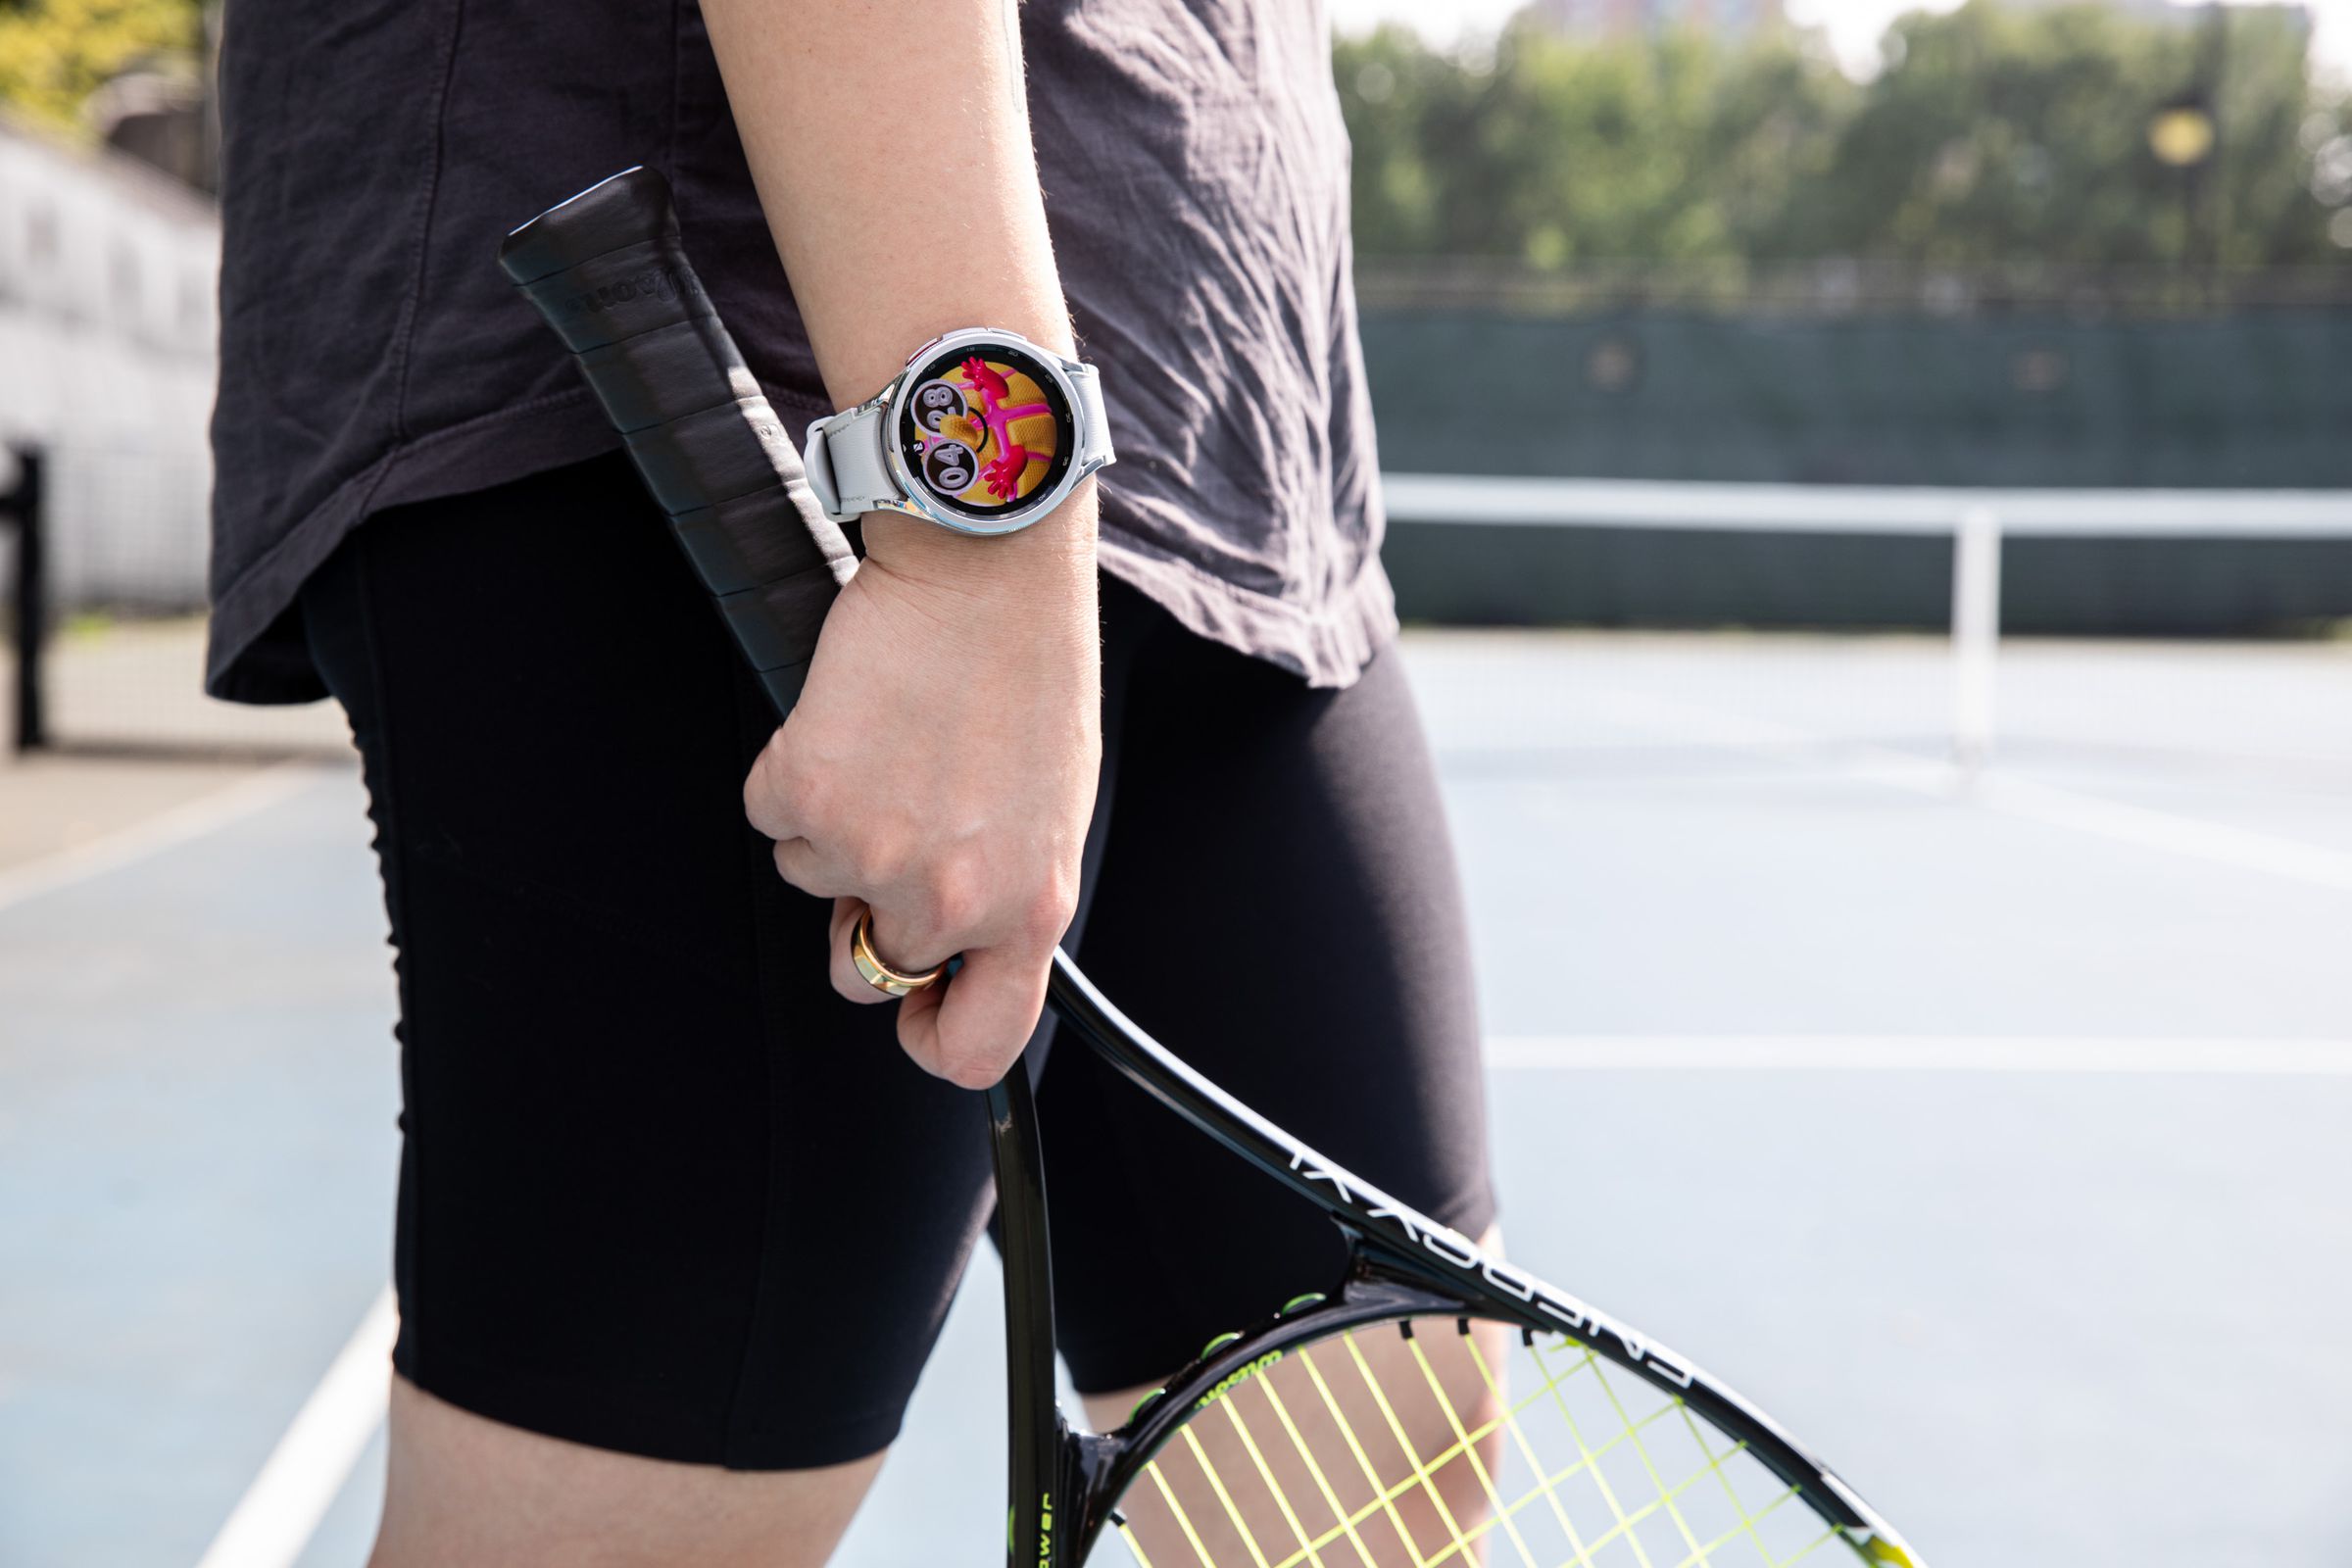 Person wearing Galaxy Watch 6 while holding tennis racket